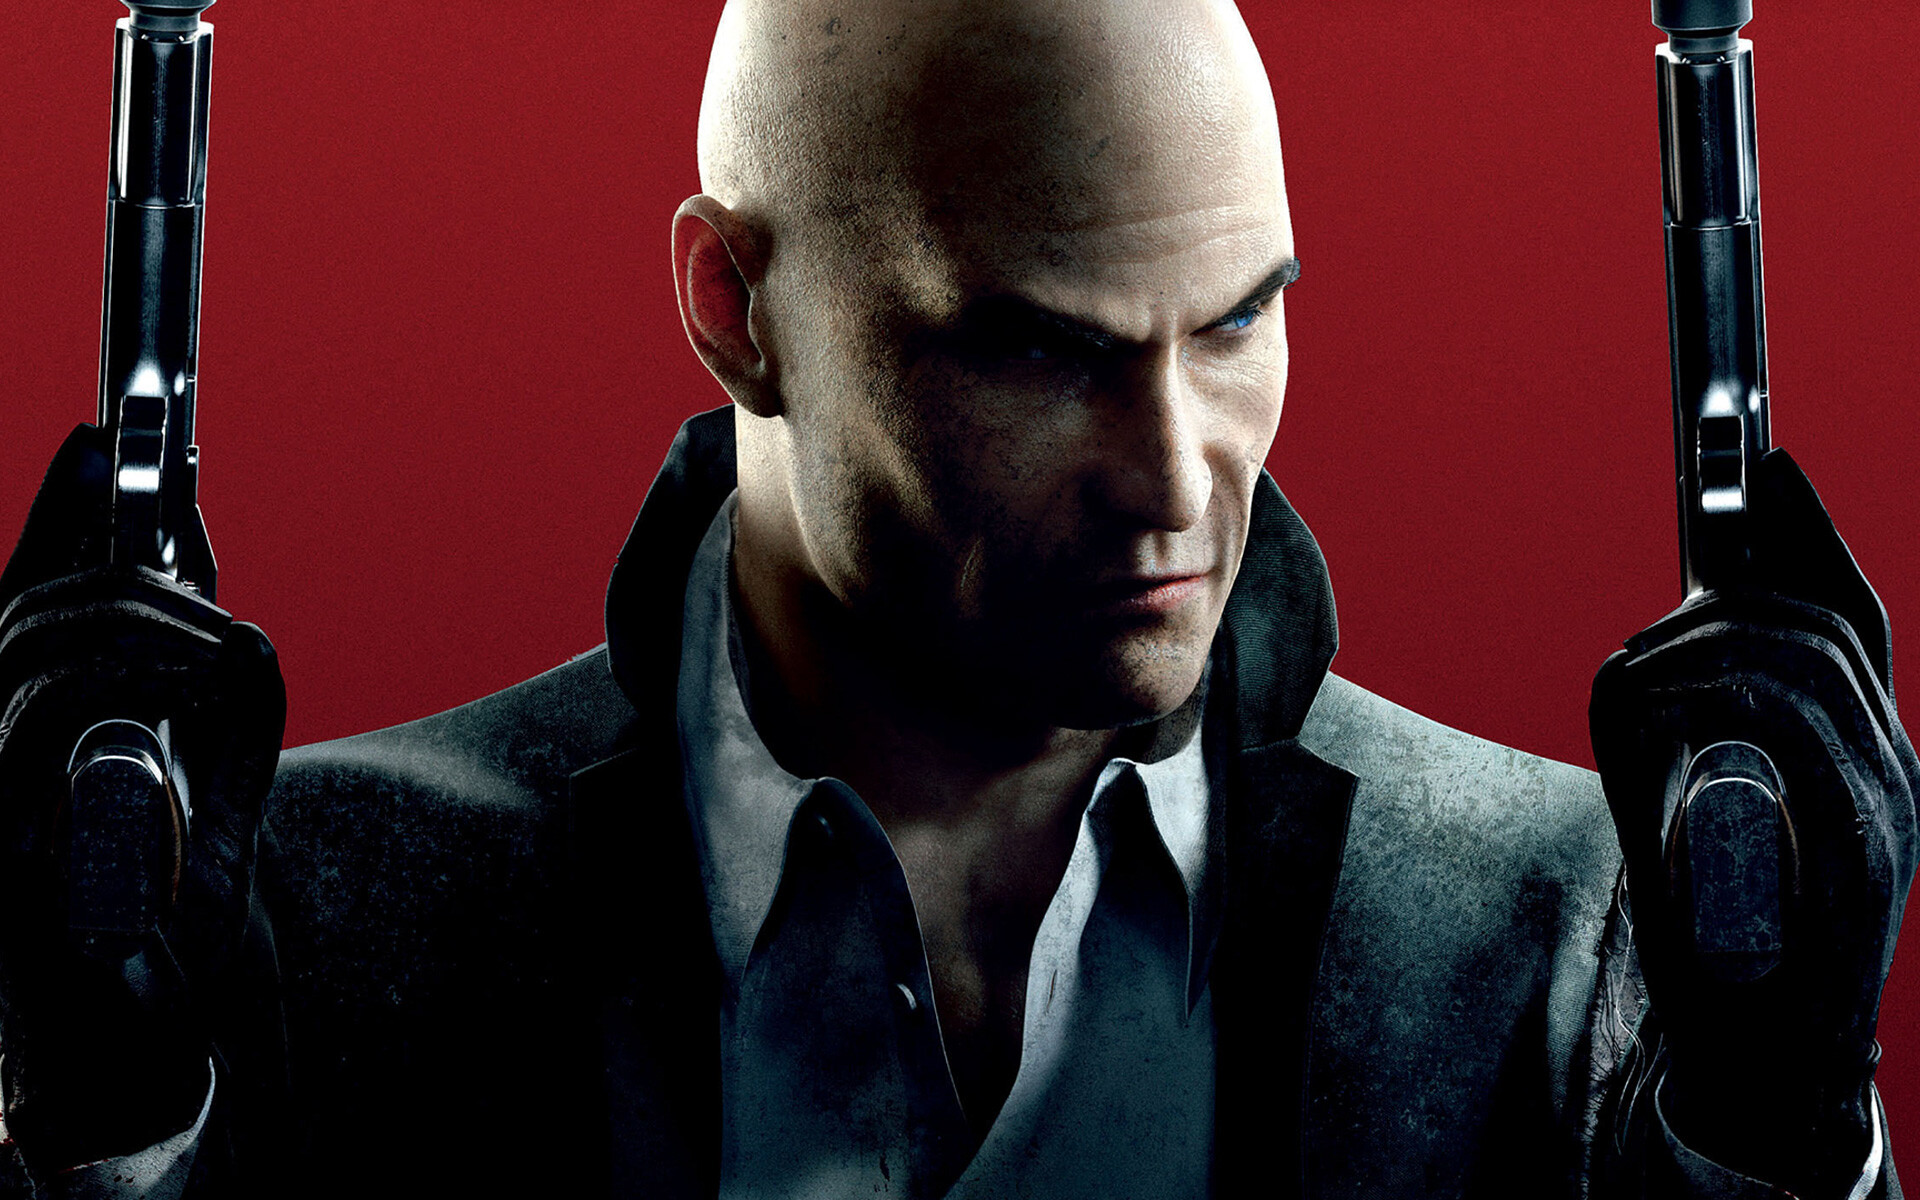 Hitman (Game): Absolution, The fifth installment in the series and the sequel to 2006's Blood Money. 1920x1200 HD Wallpaper.